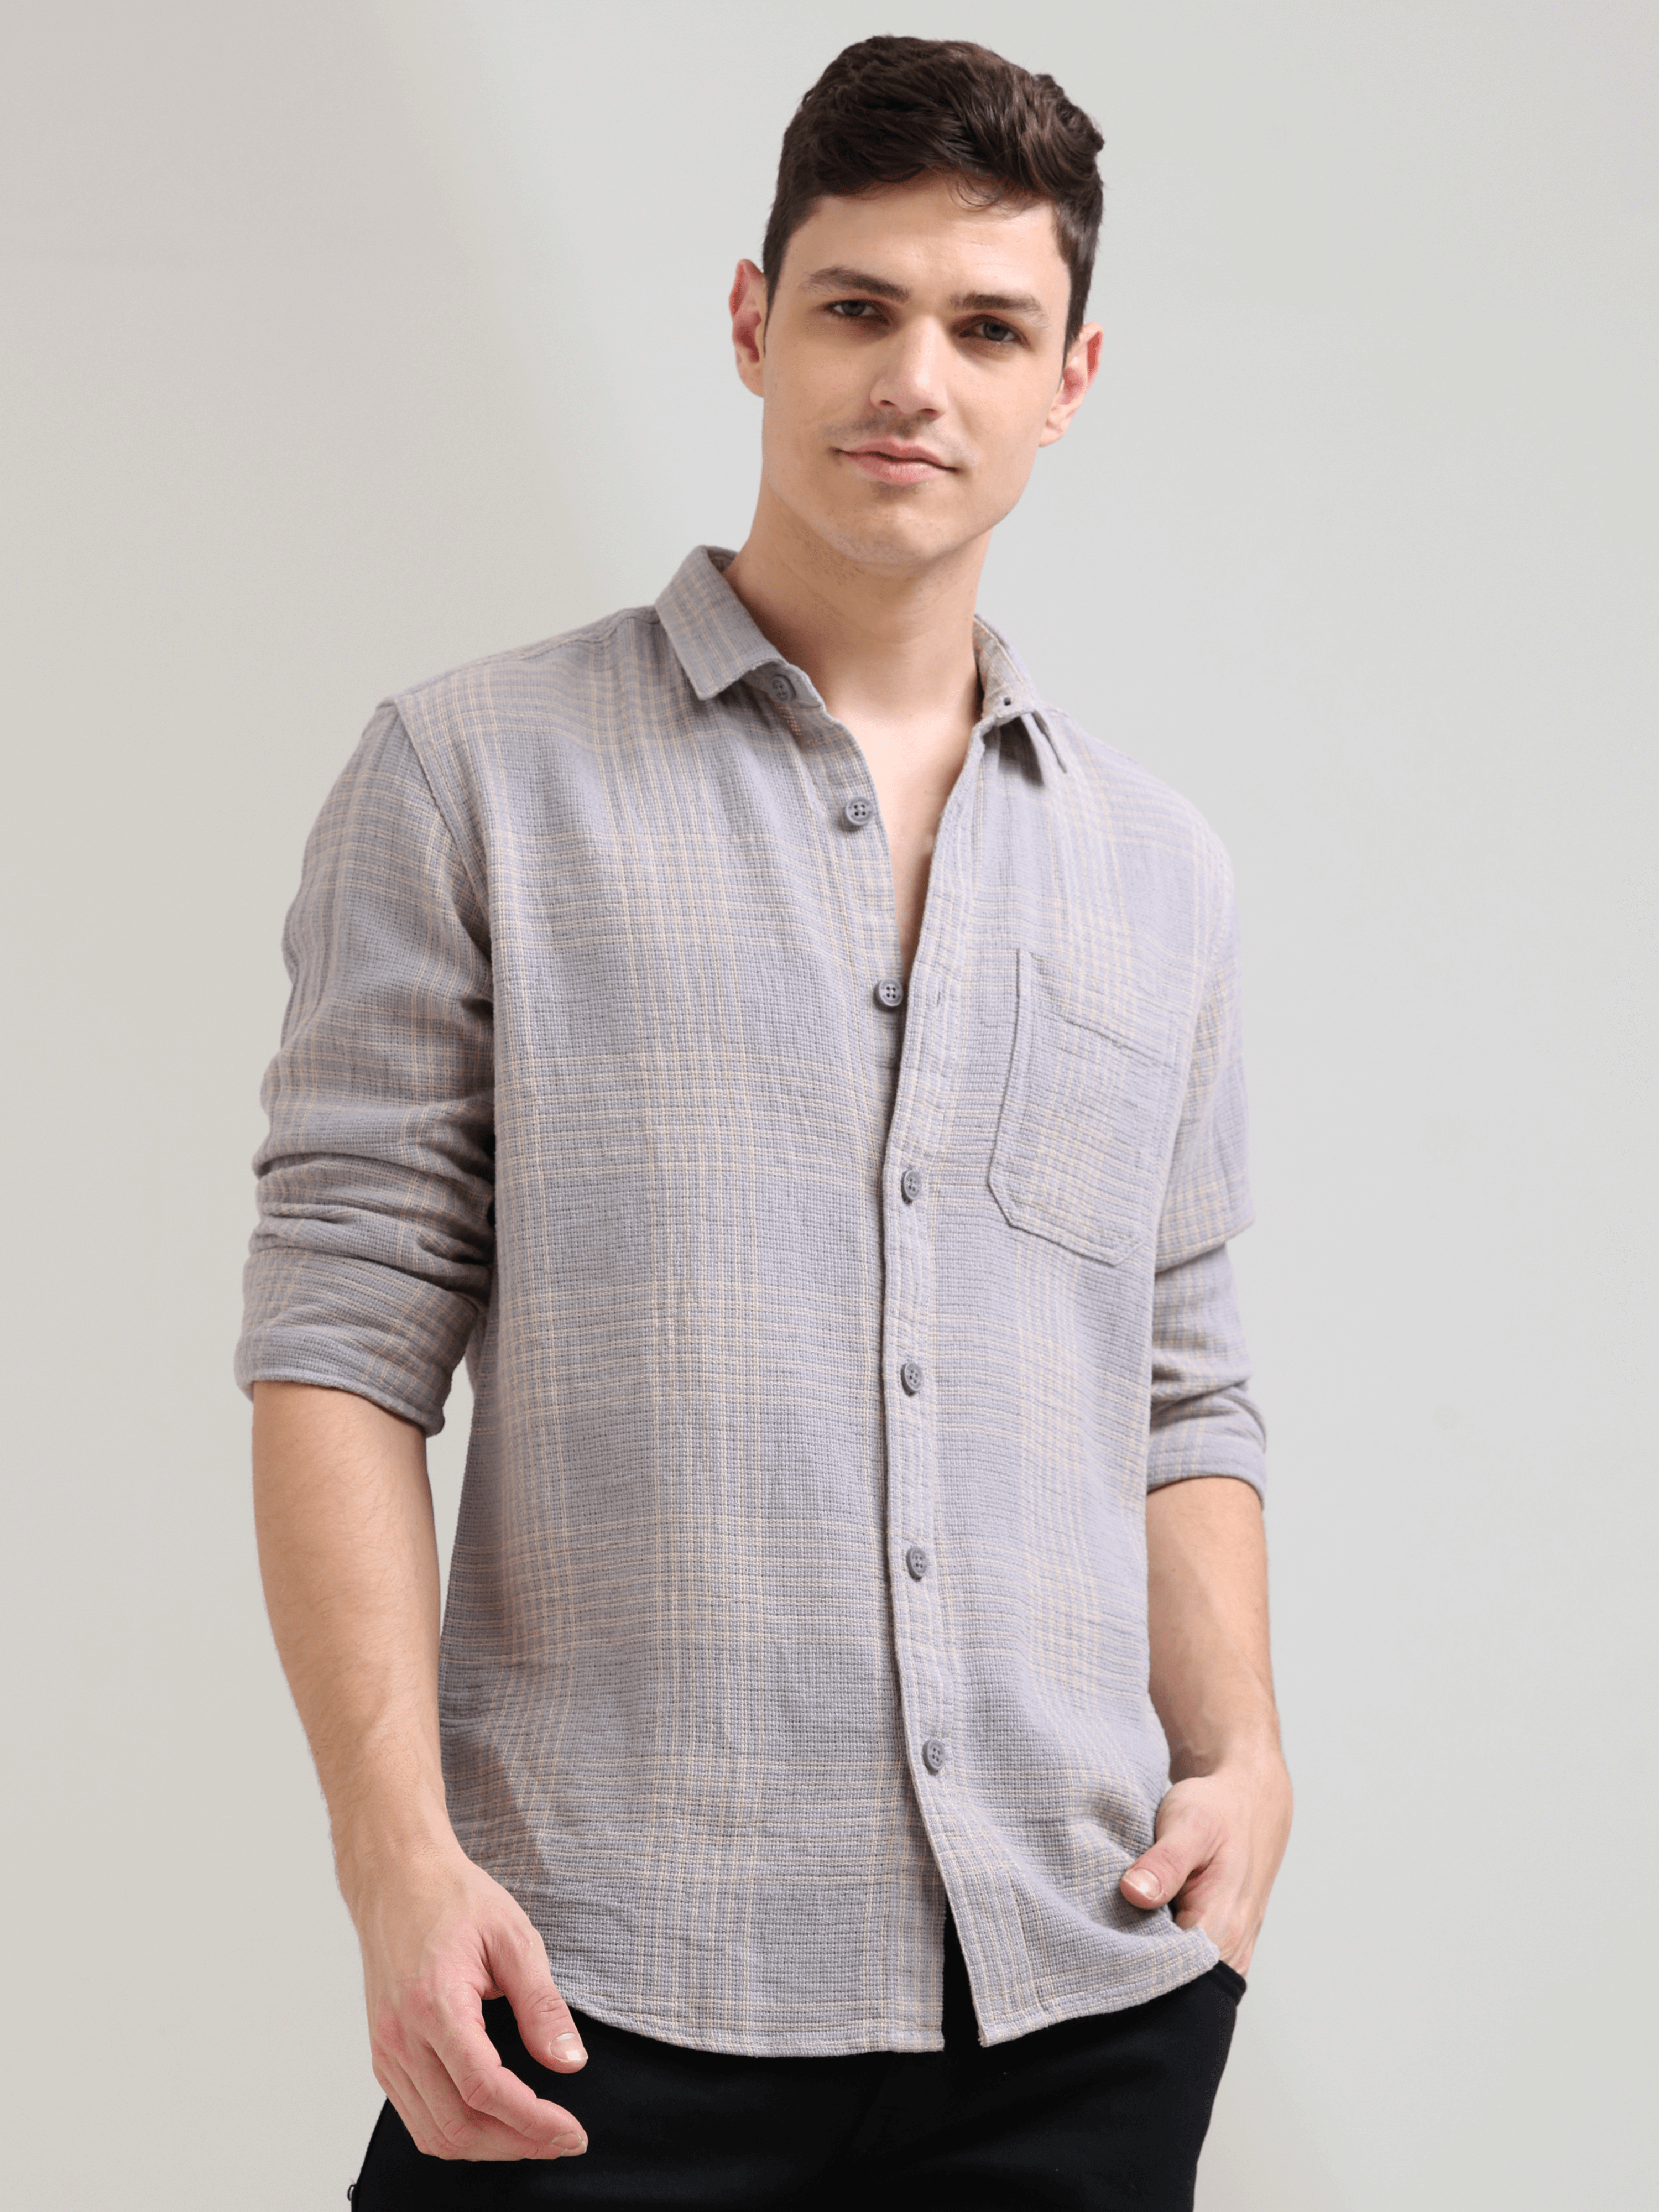 New age off-cream casual check shirt shop online at Estilocus. 100% Cotton • Full-sleeve check shirt• Cut and sew placket• Regular collar• Double button edge cuff• Single pocket • Curved bottom hemline .• All double needle construction, finest quality sew